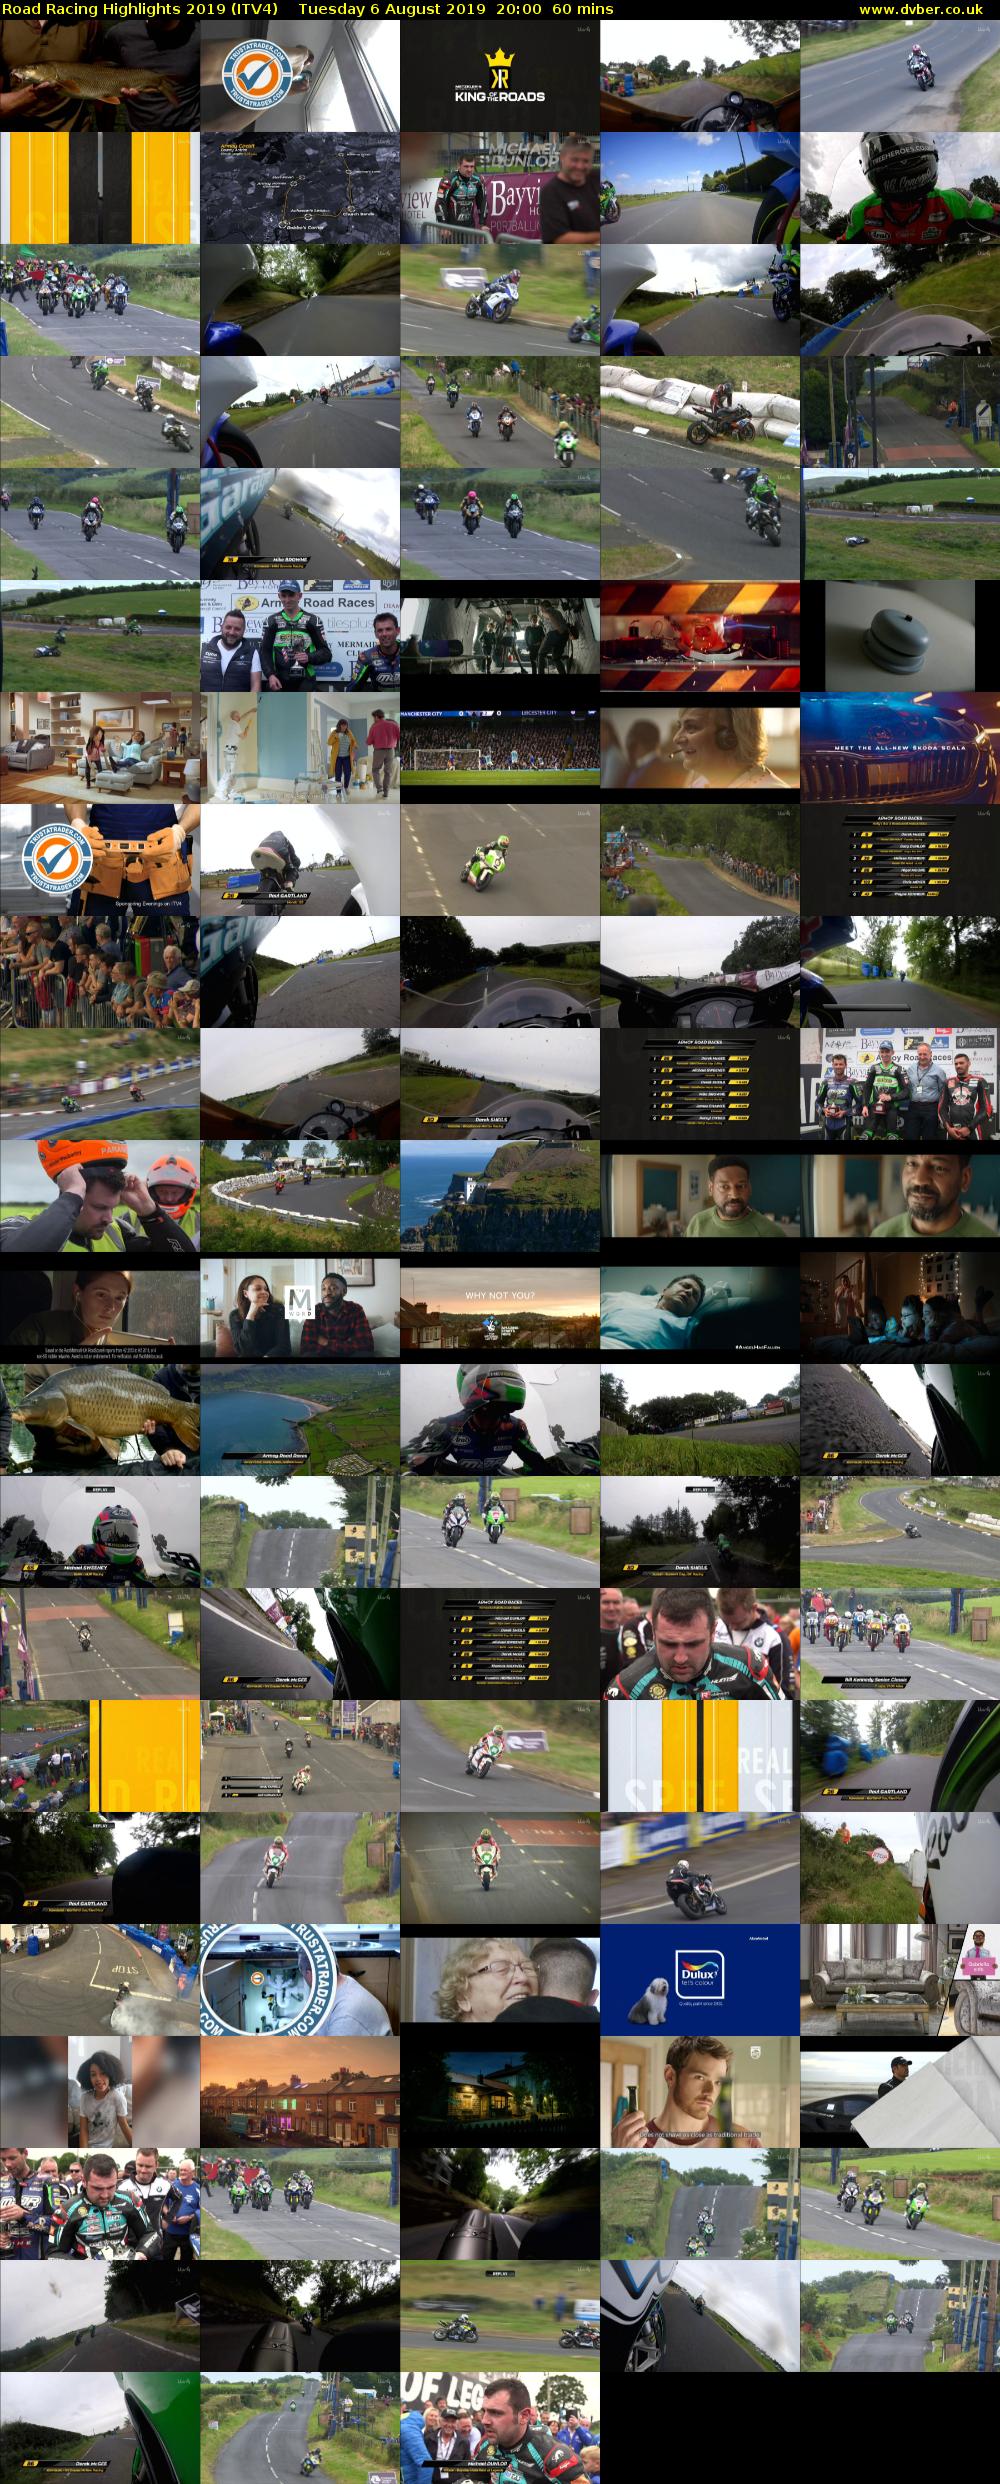 Road Racing Highlights 2019 (ITV4) Tuesday 6 August 2019 20:00 - 21:00